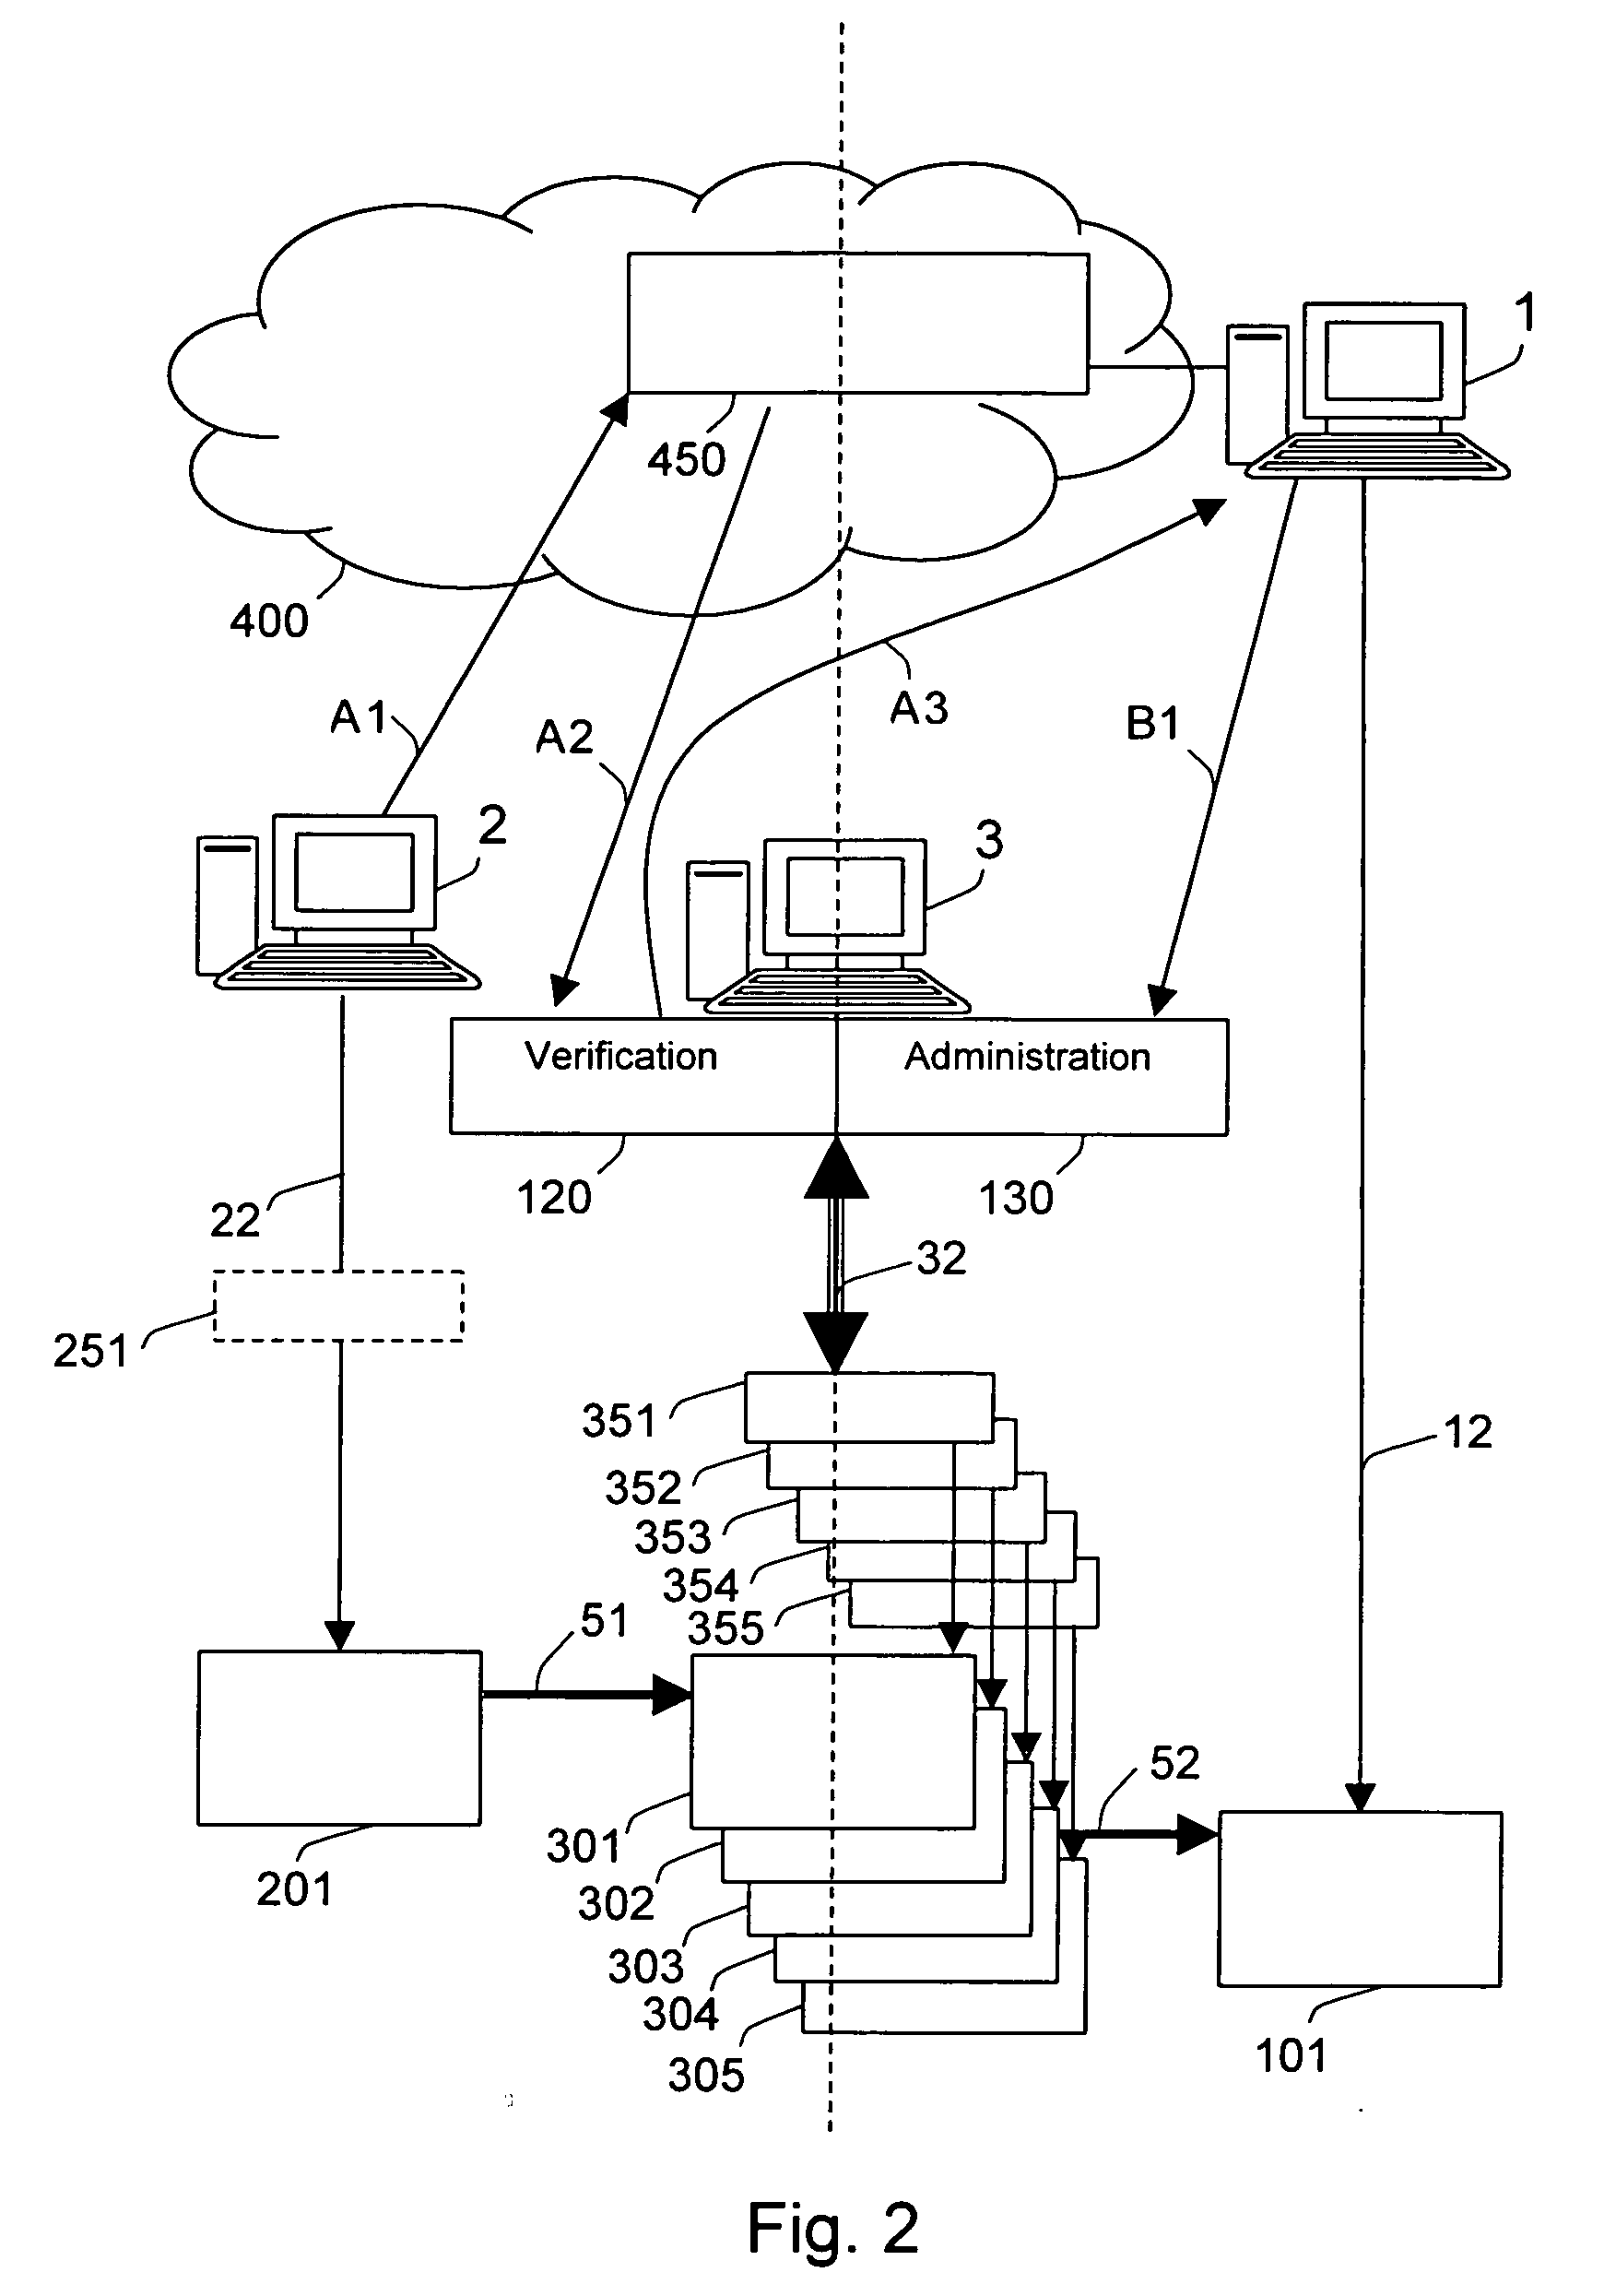 Computer implemented method and system for rapid verification and administration of fund transfers and a computer program for performing said method